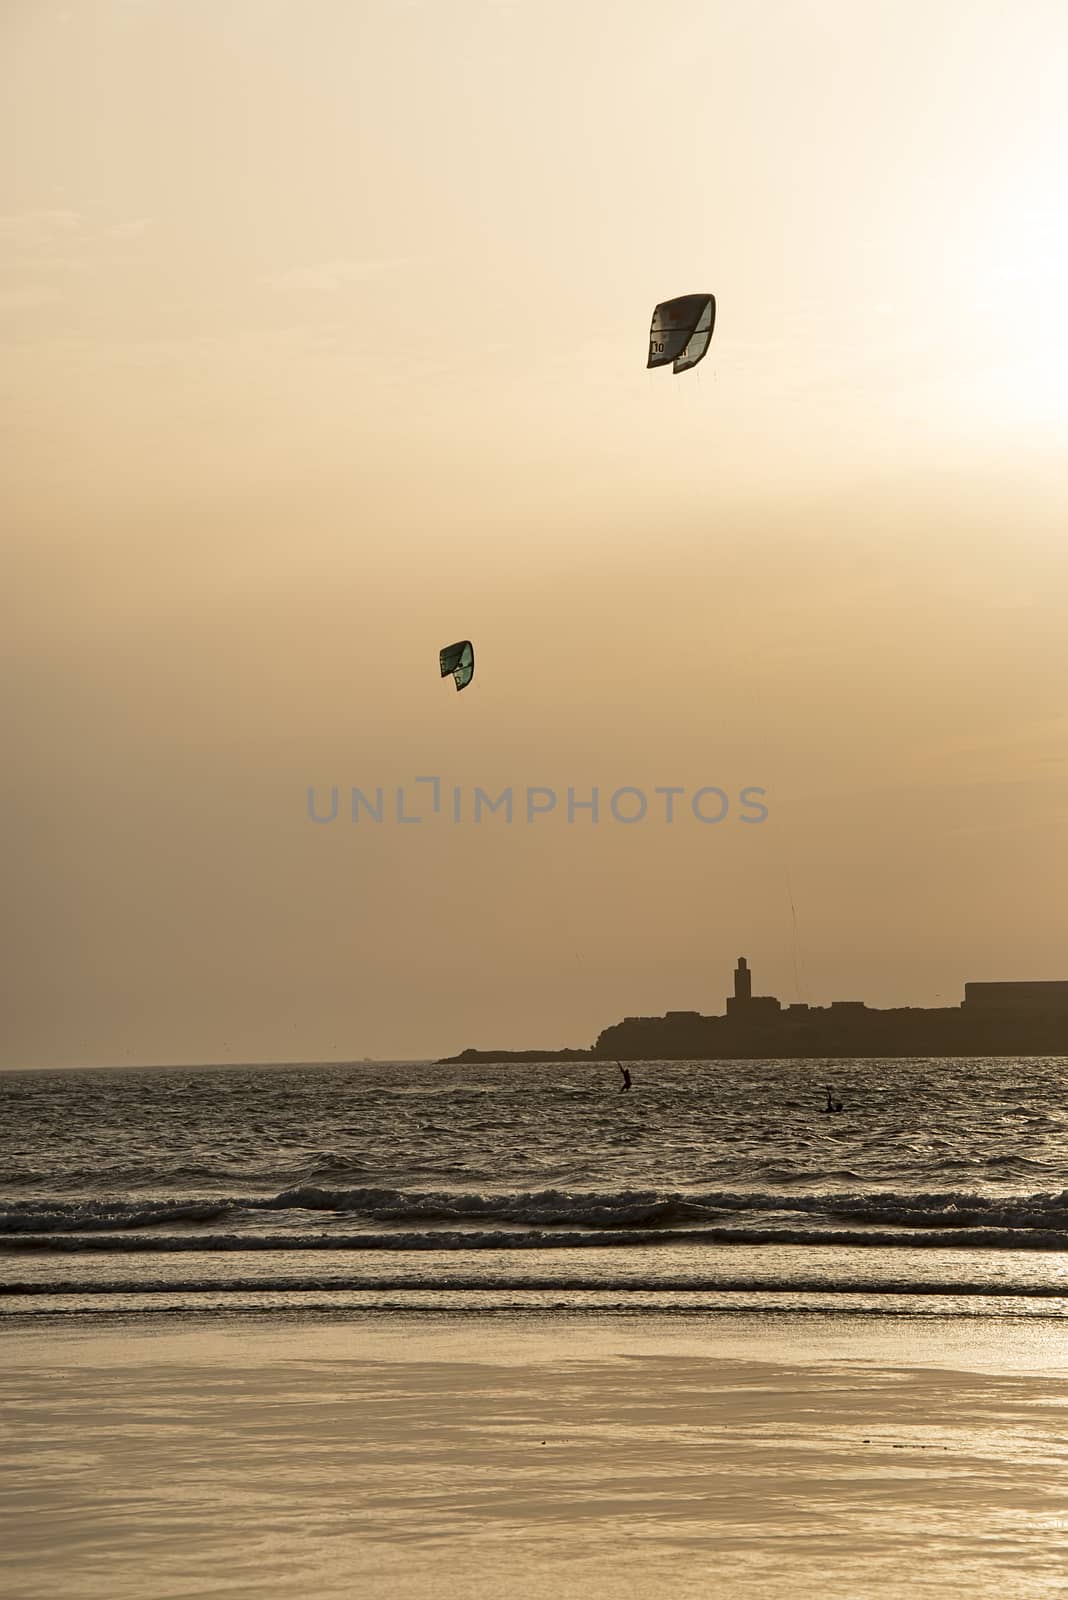 Essaouria, Morocco - September 2017: Early evening kite surfing as the sun starts to set over the ocean
